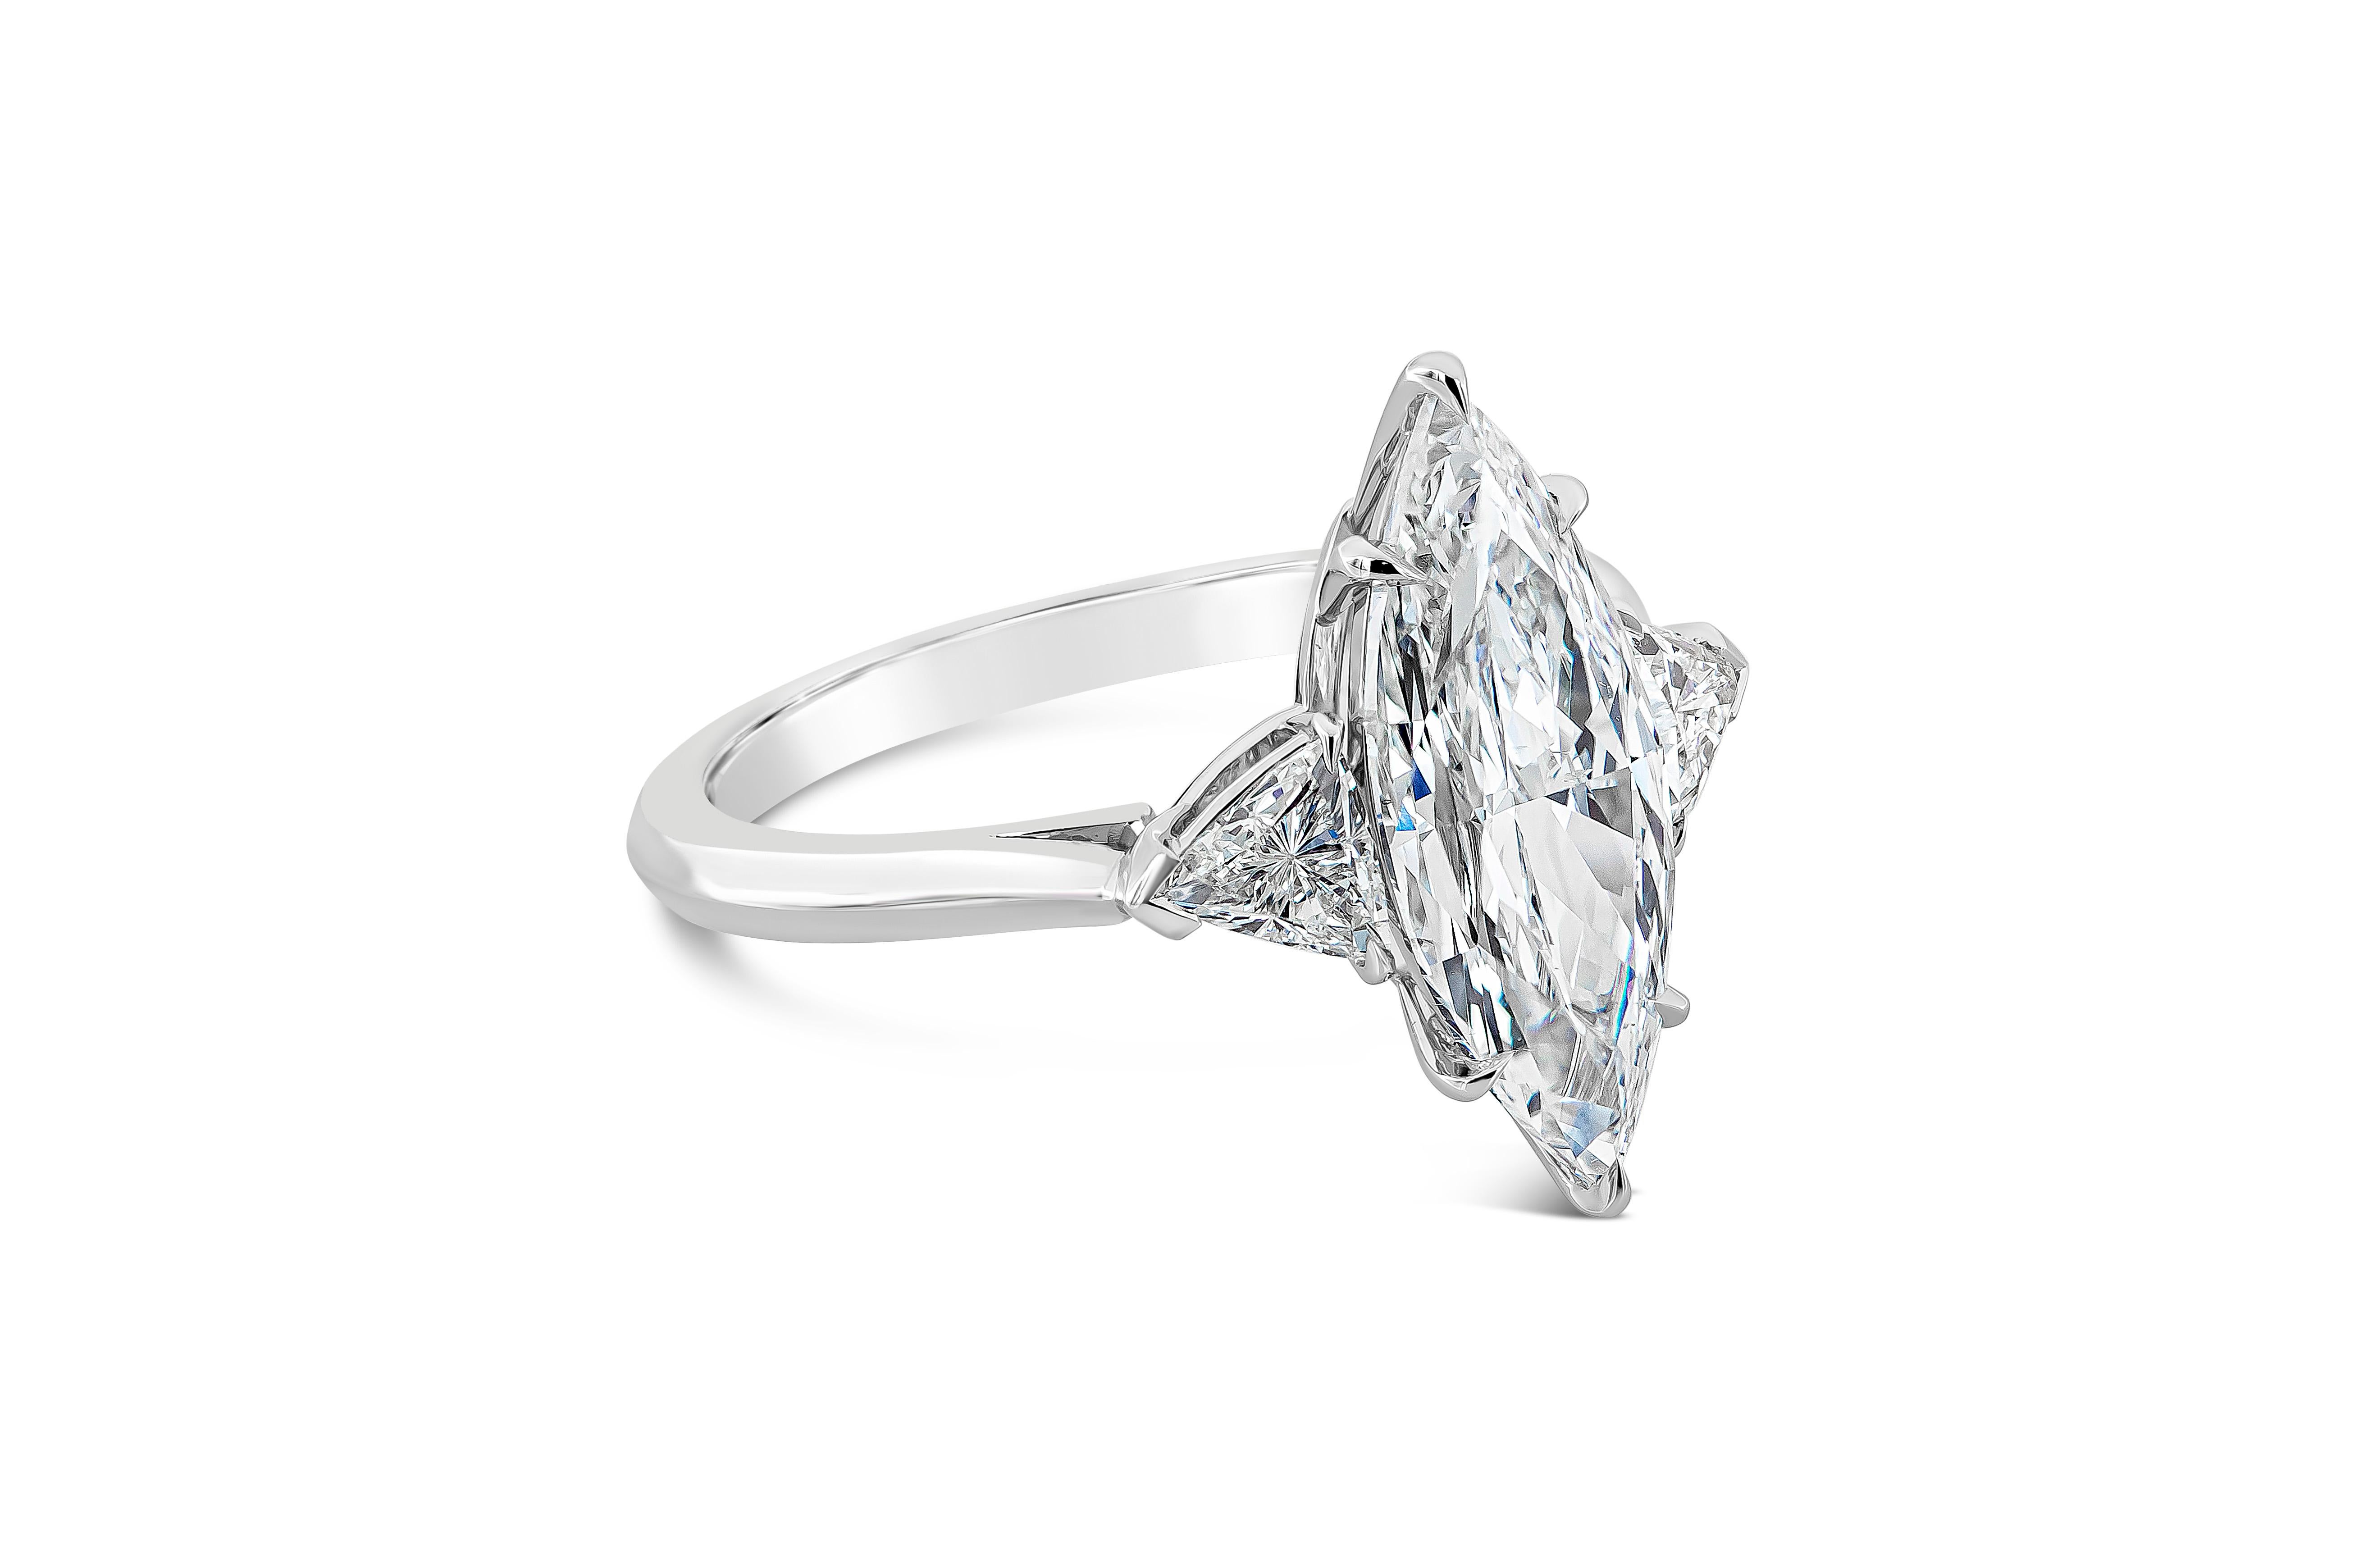 Featuring 2.72 carats marquise cut diamond certified by GIA as D color, SI1 in clarity. Flanking the center stone are two trillion cut diamonds weighing 0.56 carats total, D color and VS in clarity. Set in a polished knife-edge setting made in